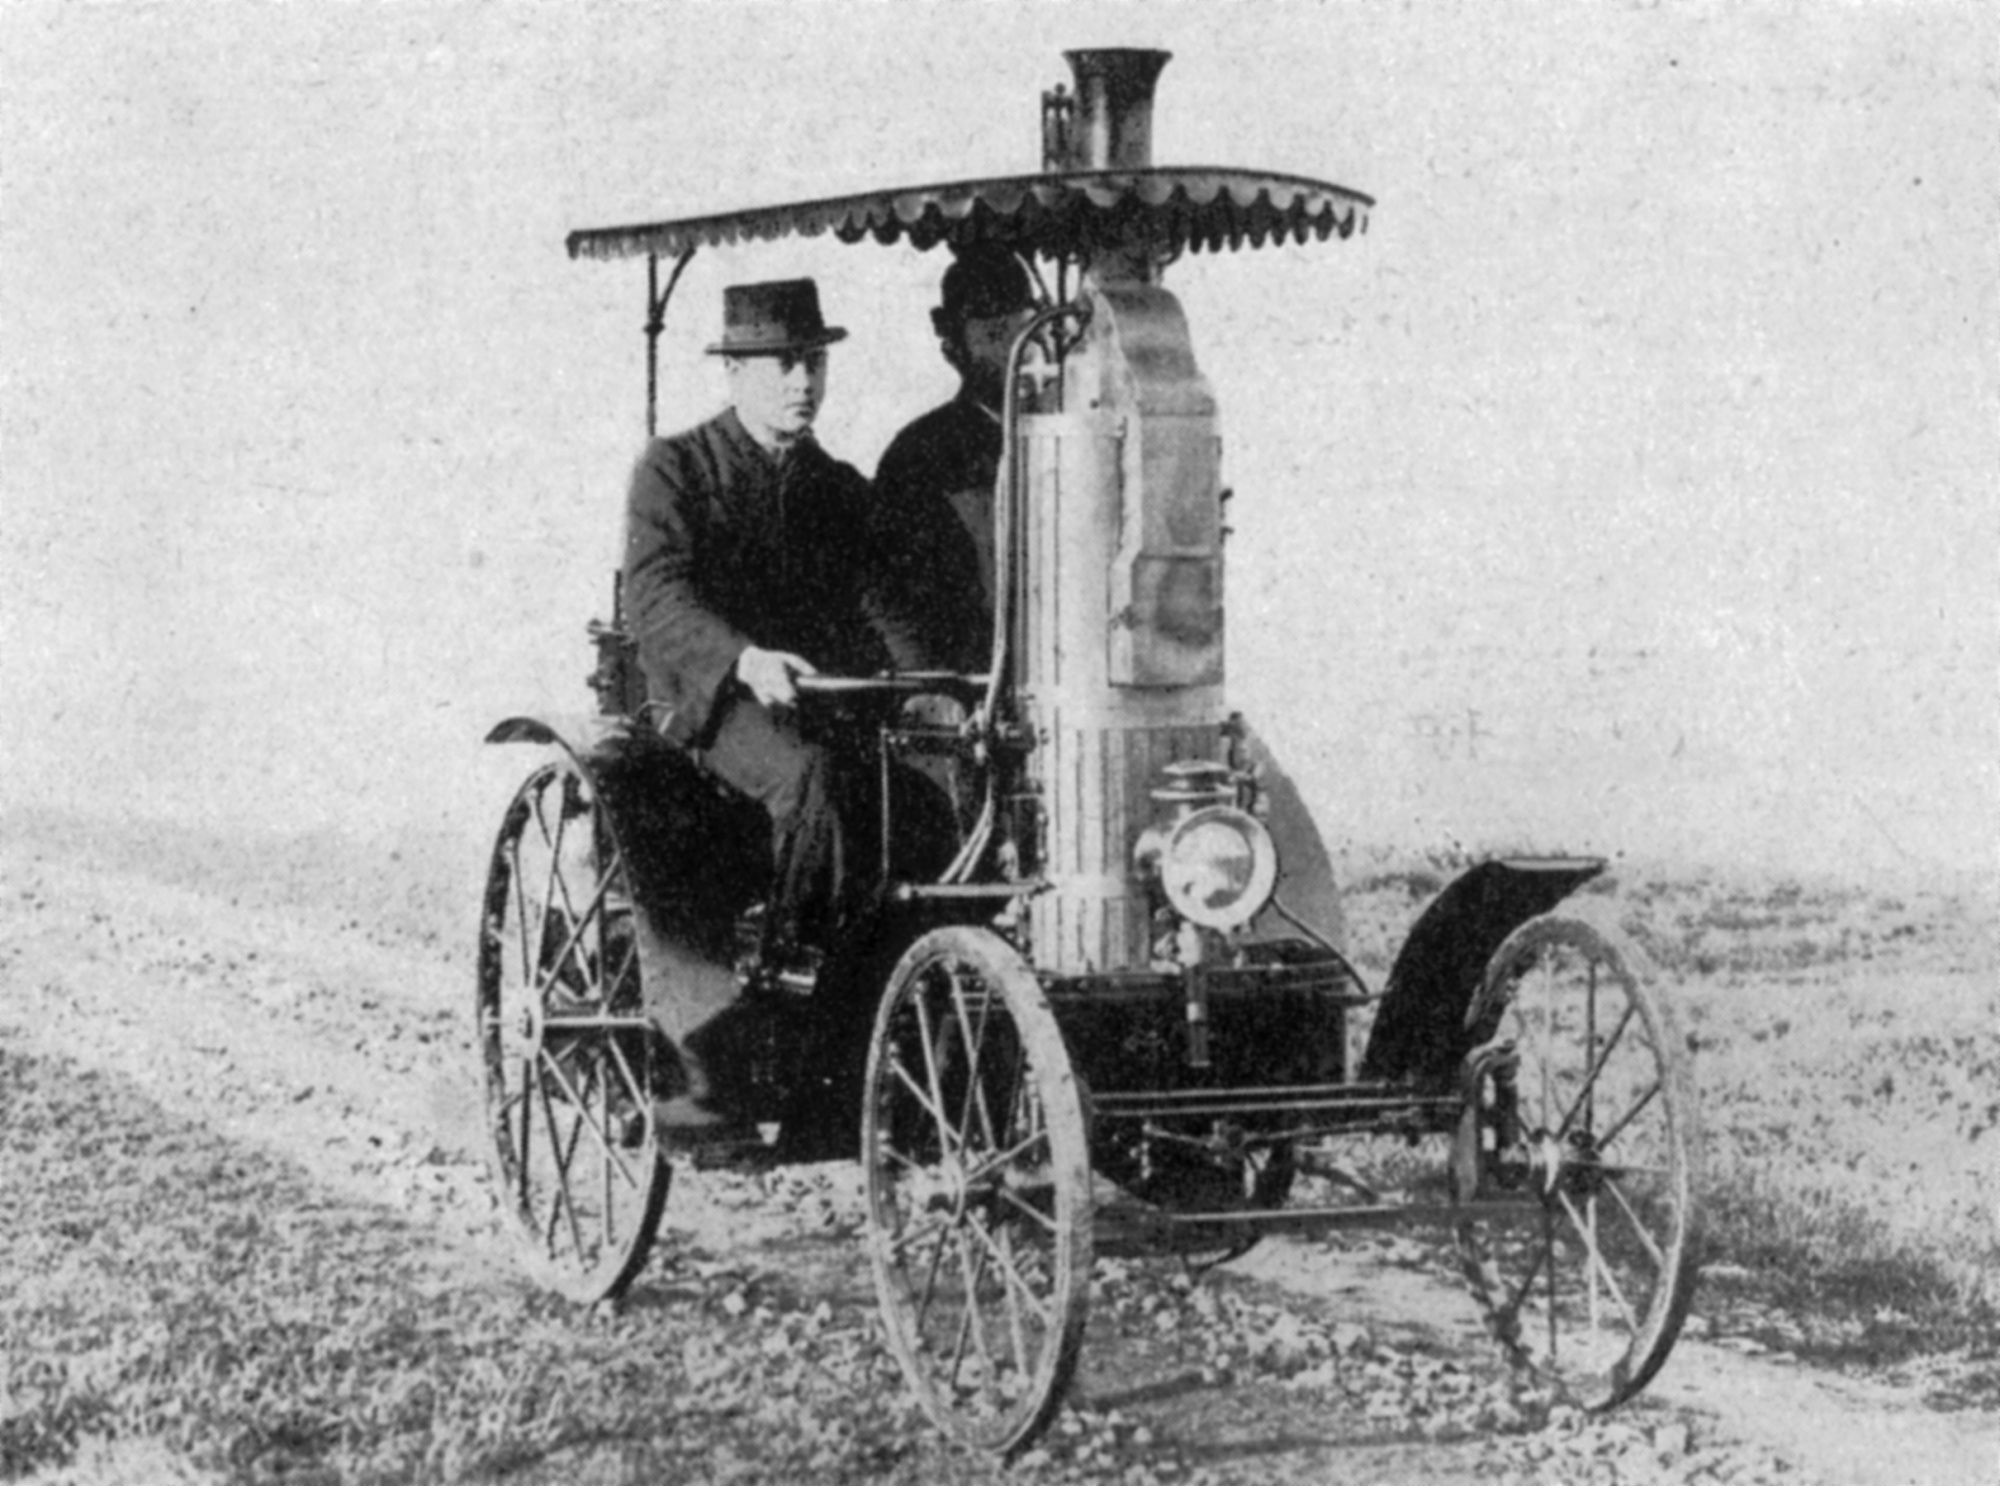 The road not taken: In the 1880s, steam-powered vehicles were poised to dominate the streets. But city regulations made the explosion-prone machines less attractive.&nbsp;